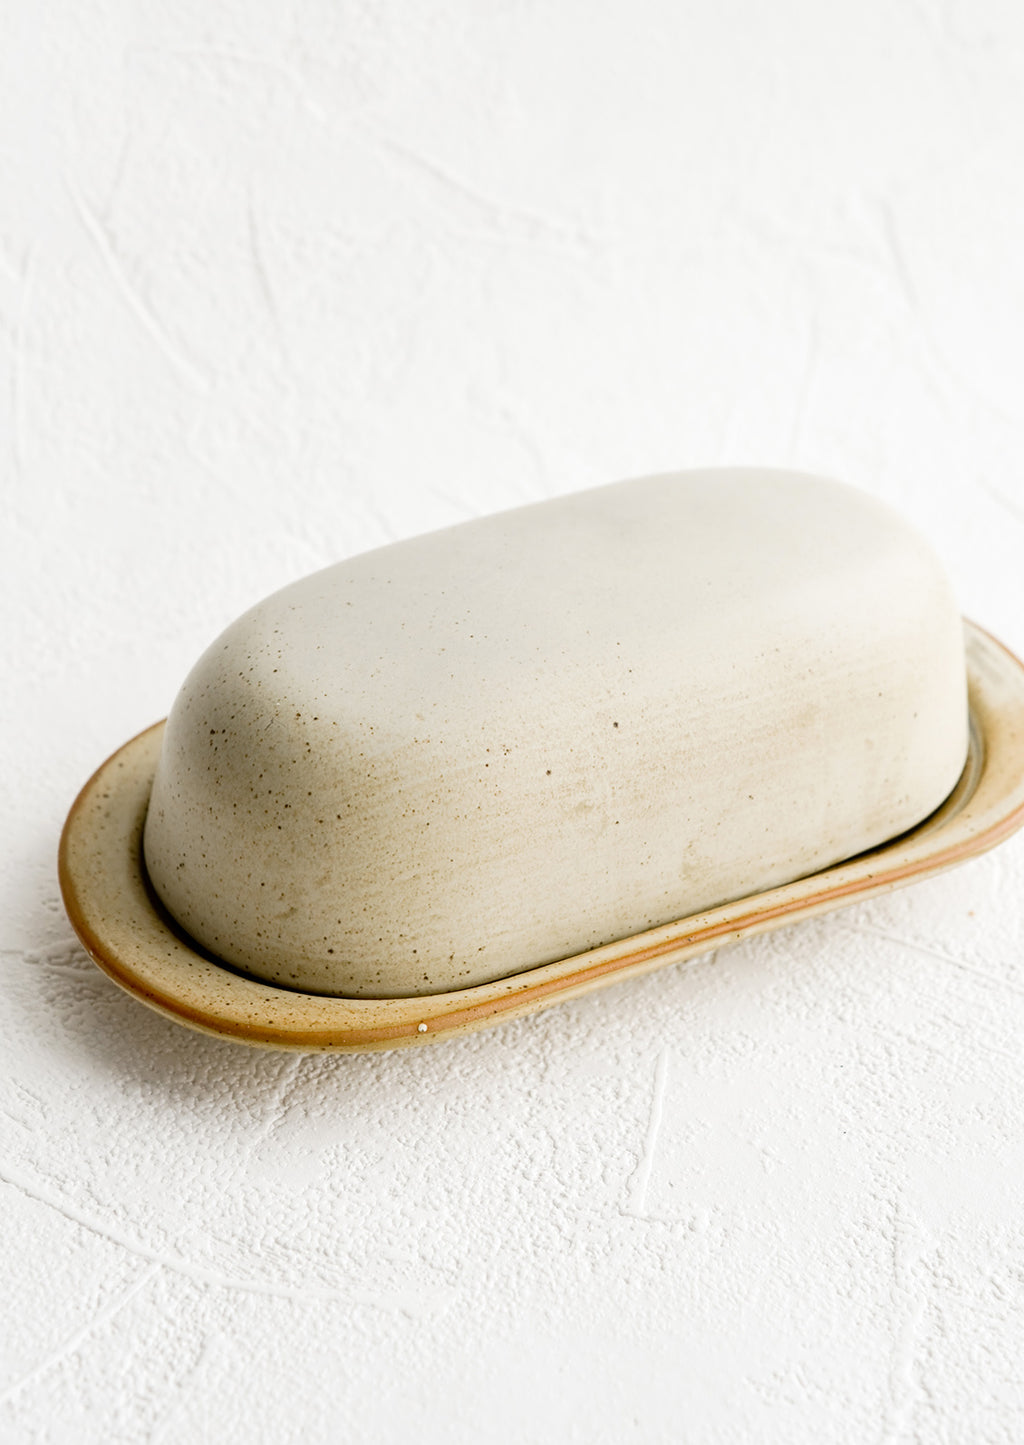 2: An oblong ceramic butter dish and tray in a softly speckled tan glaze.